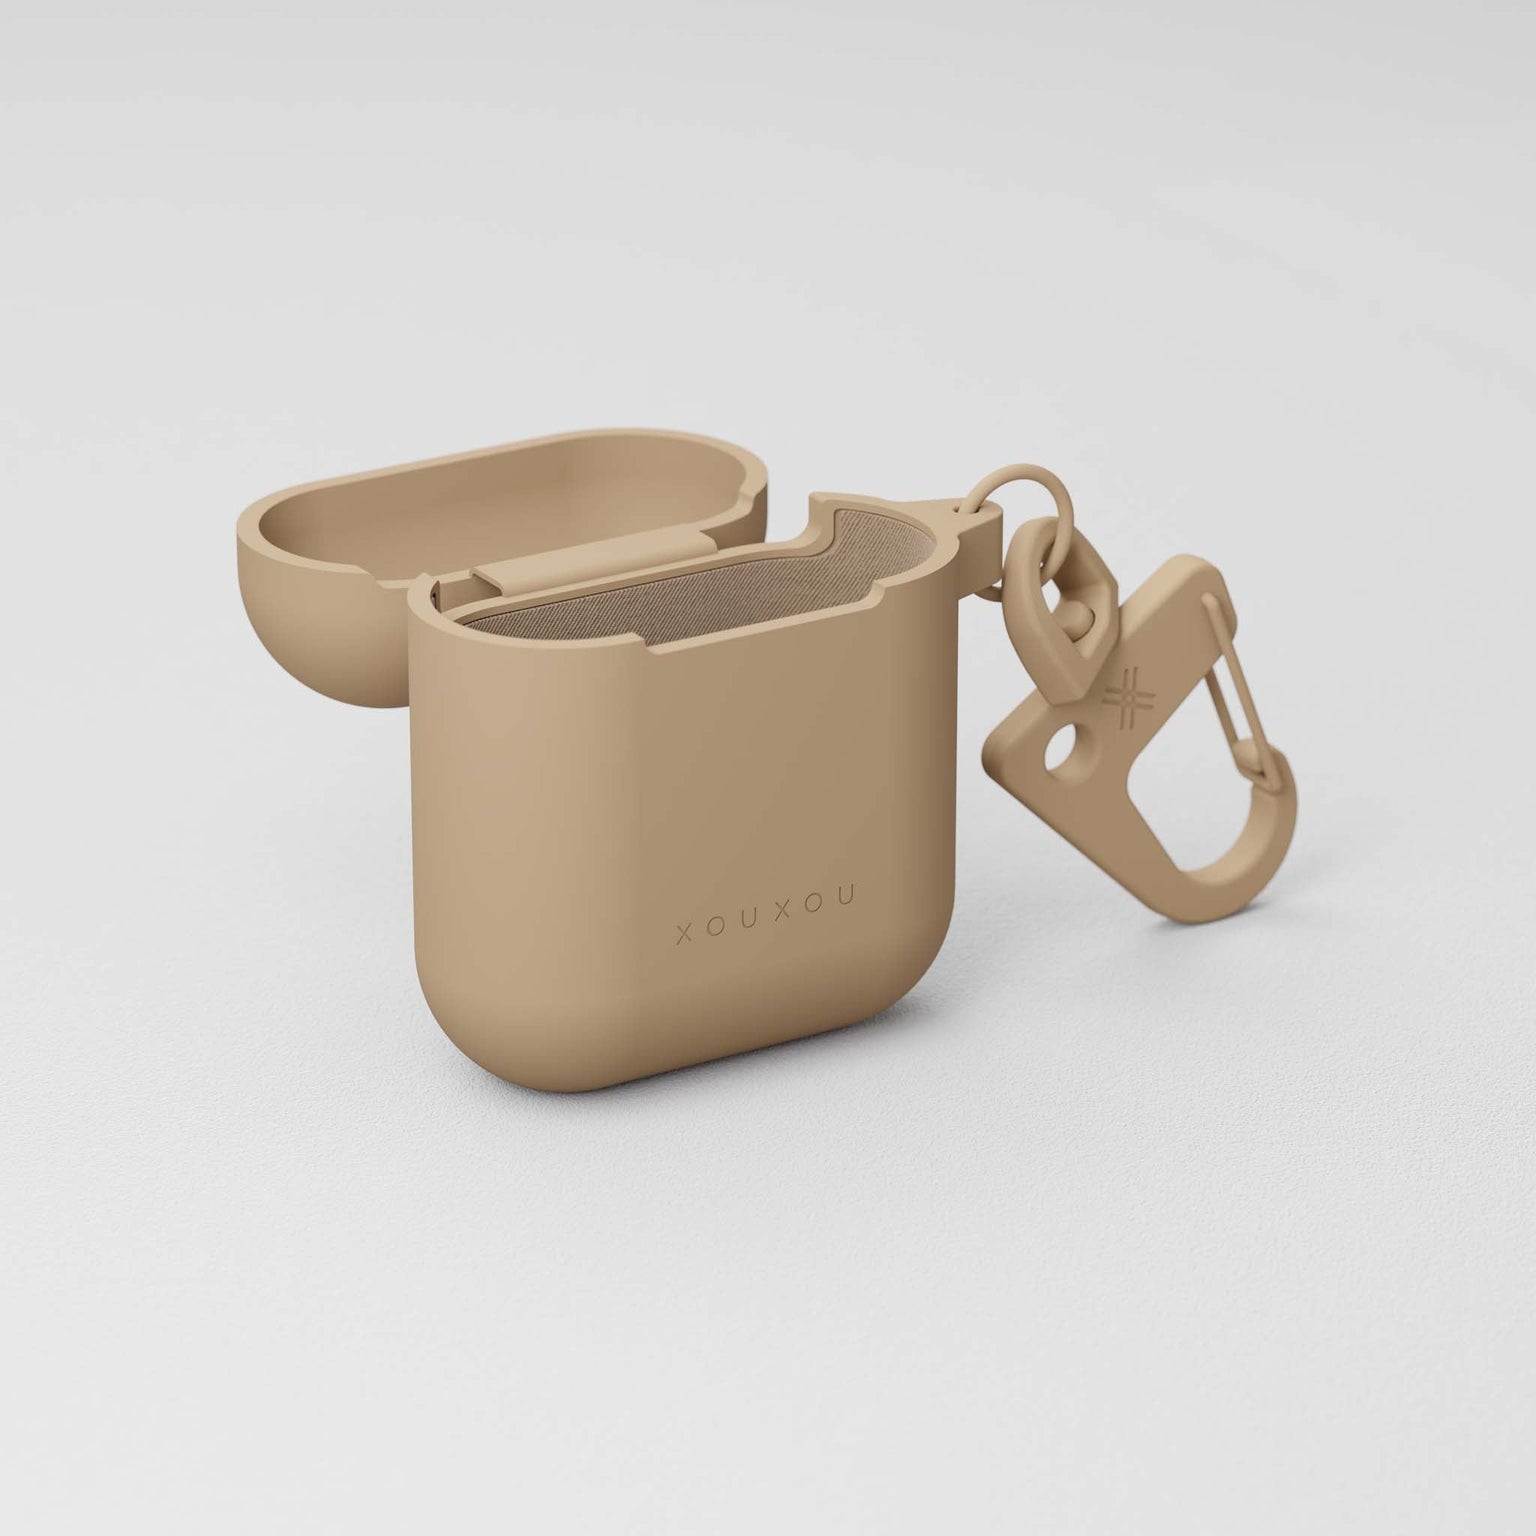 Second generation Apple AirPods case in Sand Brown | XOUXOU